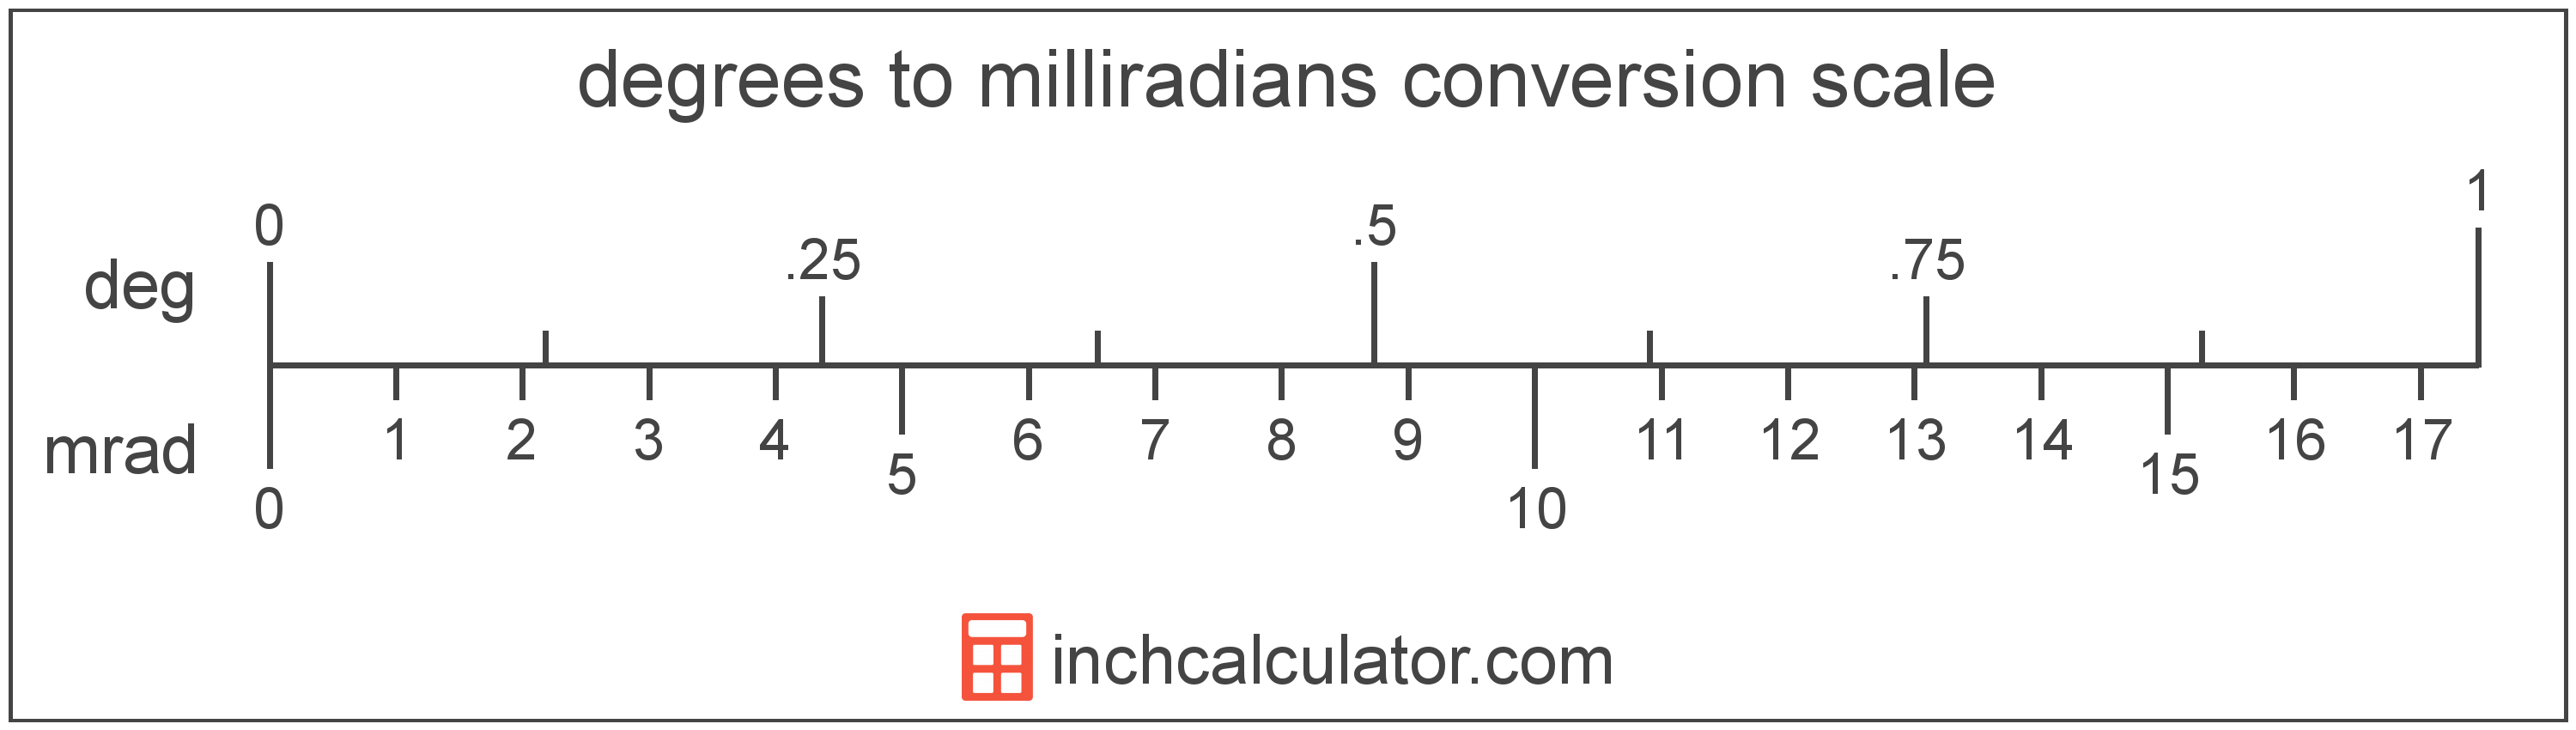 conversion scale showing milliradians and equivalent degrees angle values